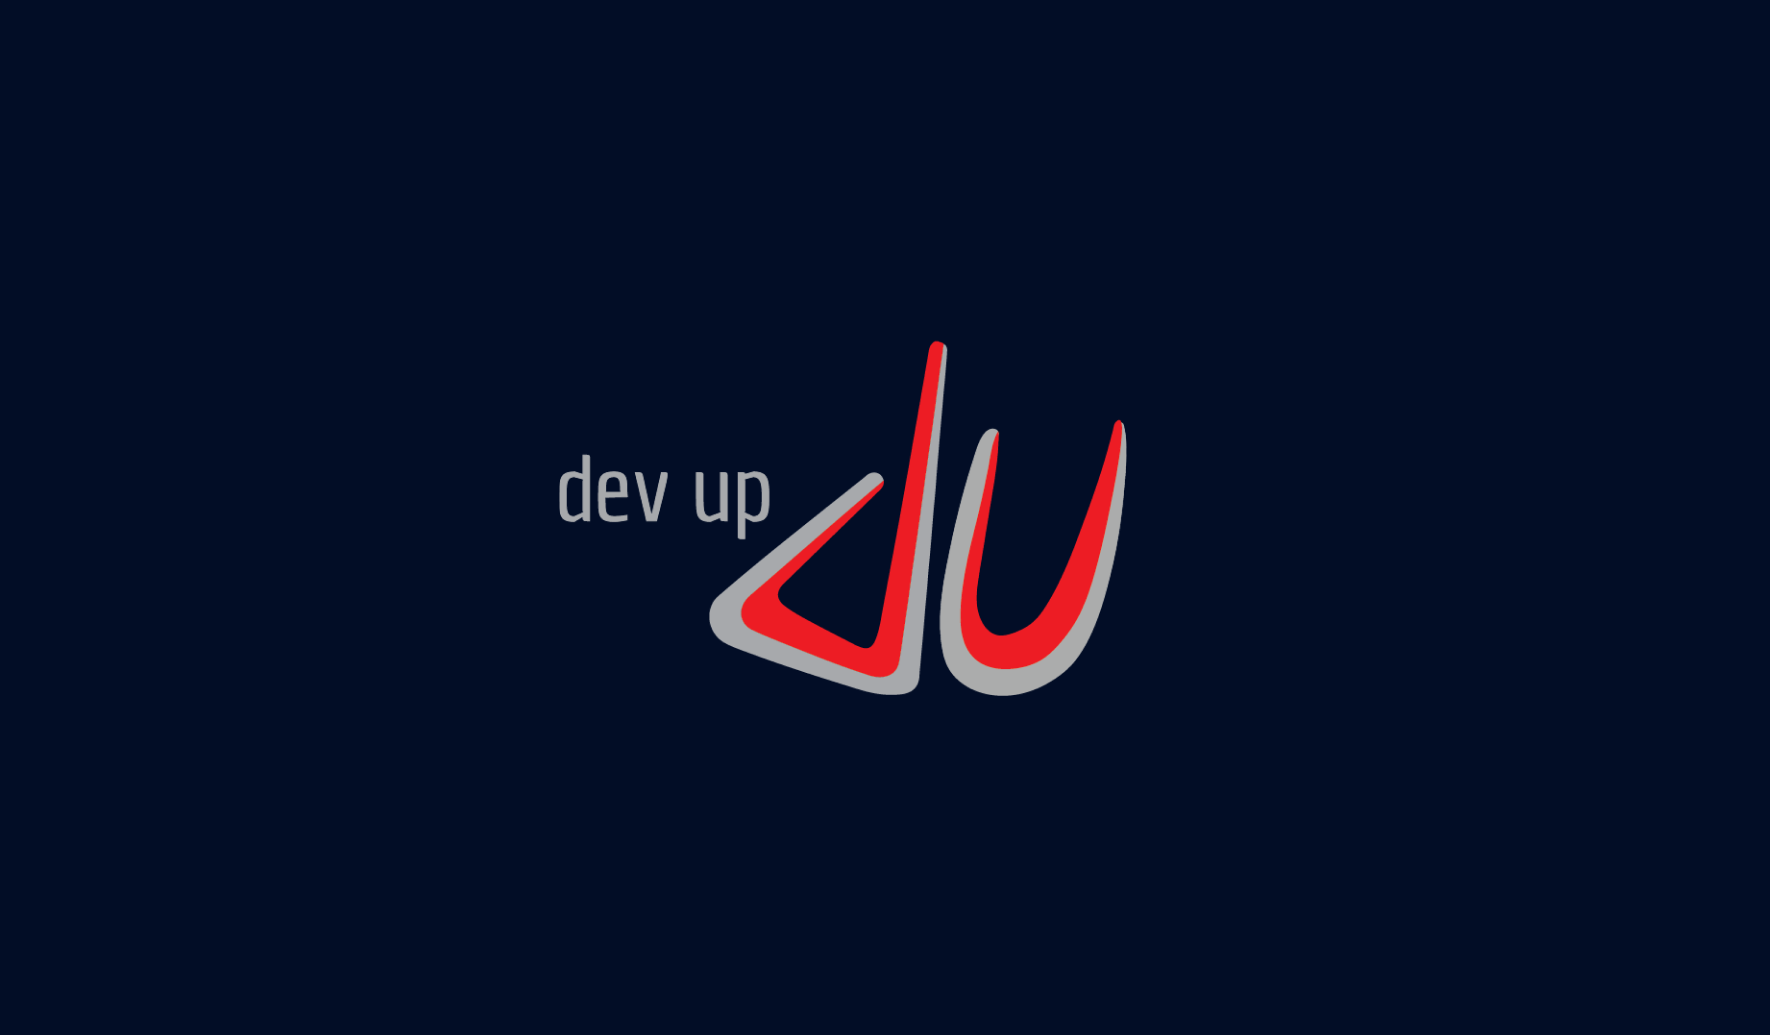 dev up 2023: Leveling up our dev skills, security posture, and careers – Source: securityboulevard.com